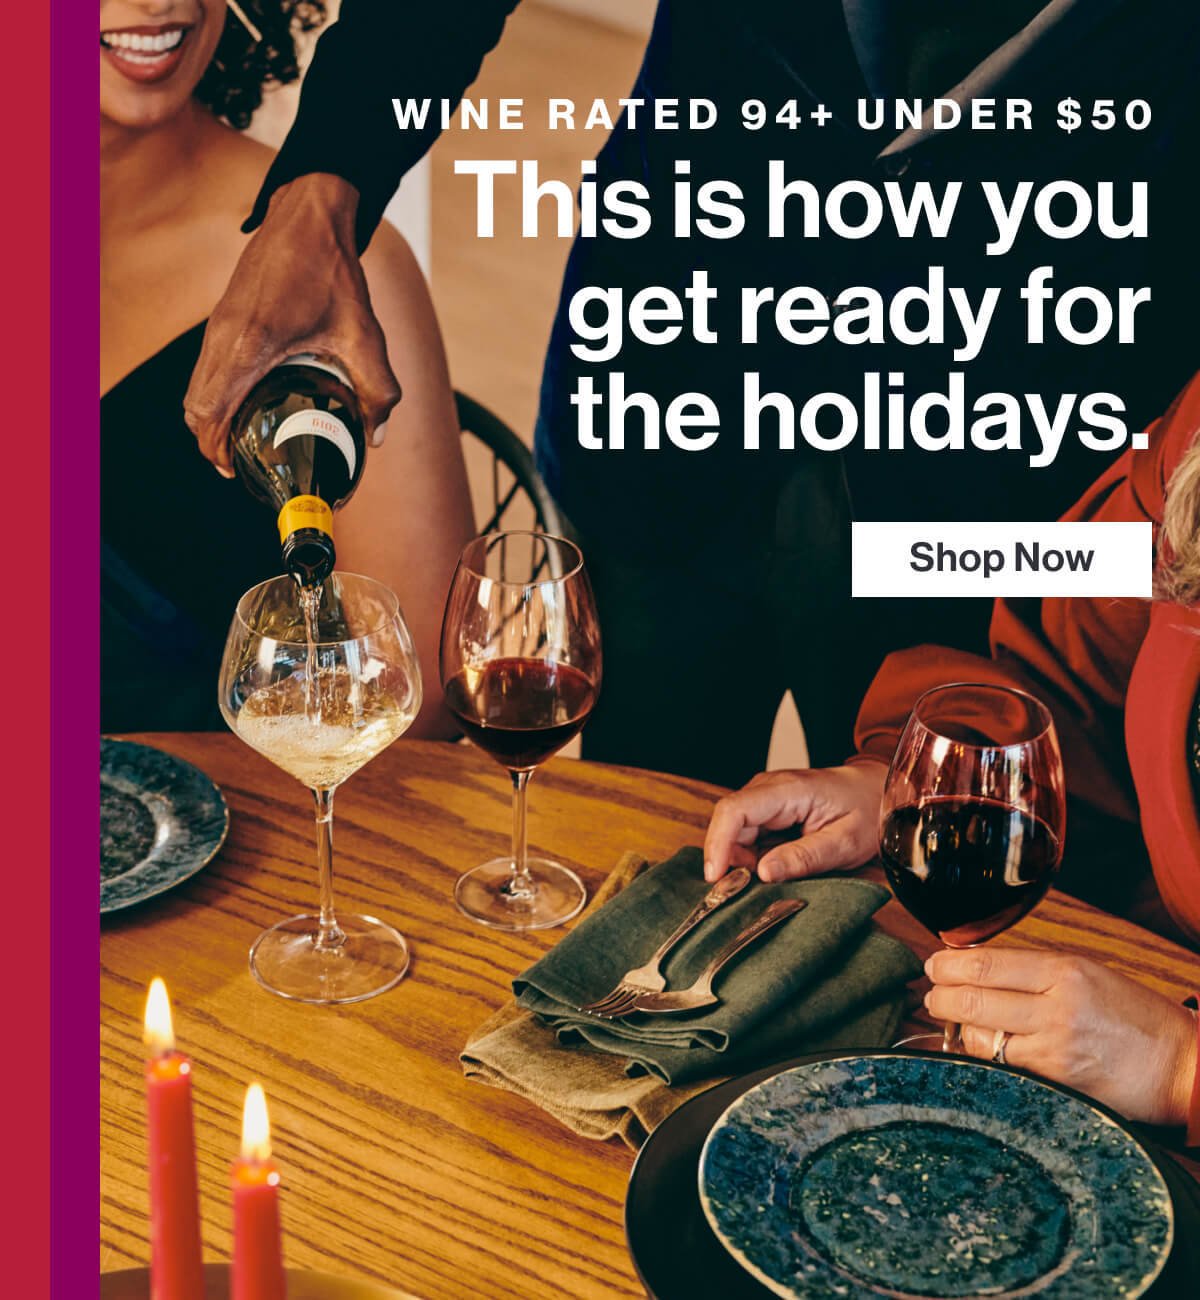 Wine rated 94+ under $50 - this is how you get ready for the holidays